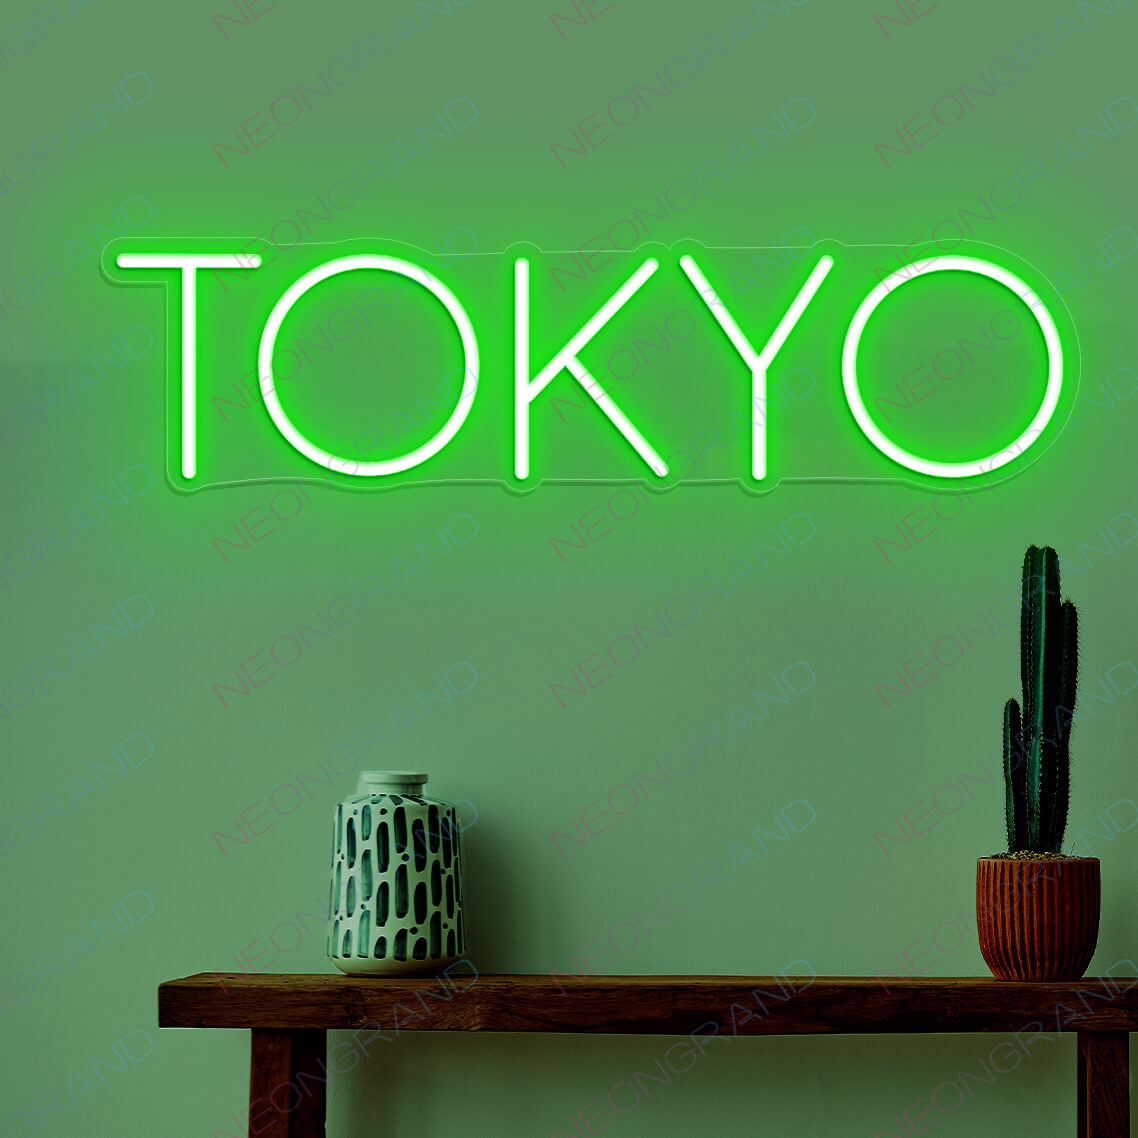 Tokyo Neon Sign Led Light, Japanese Neon Signs green